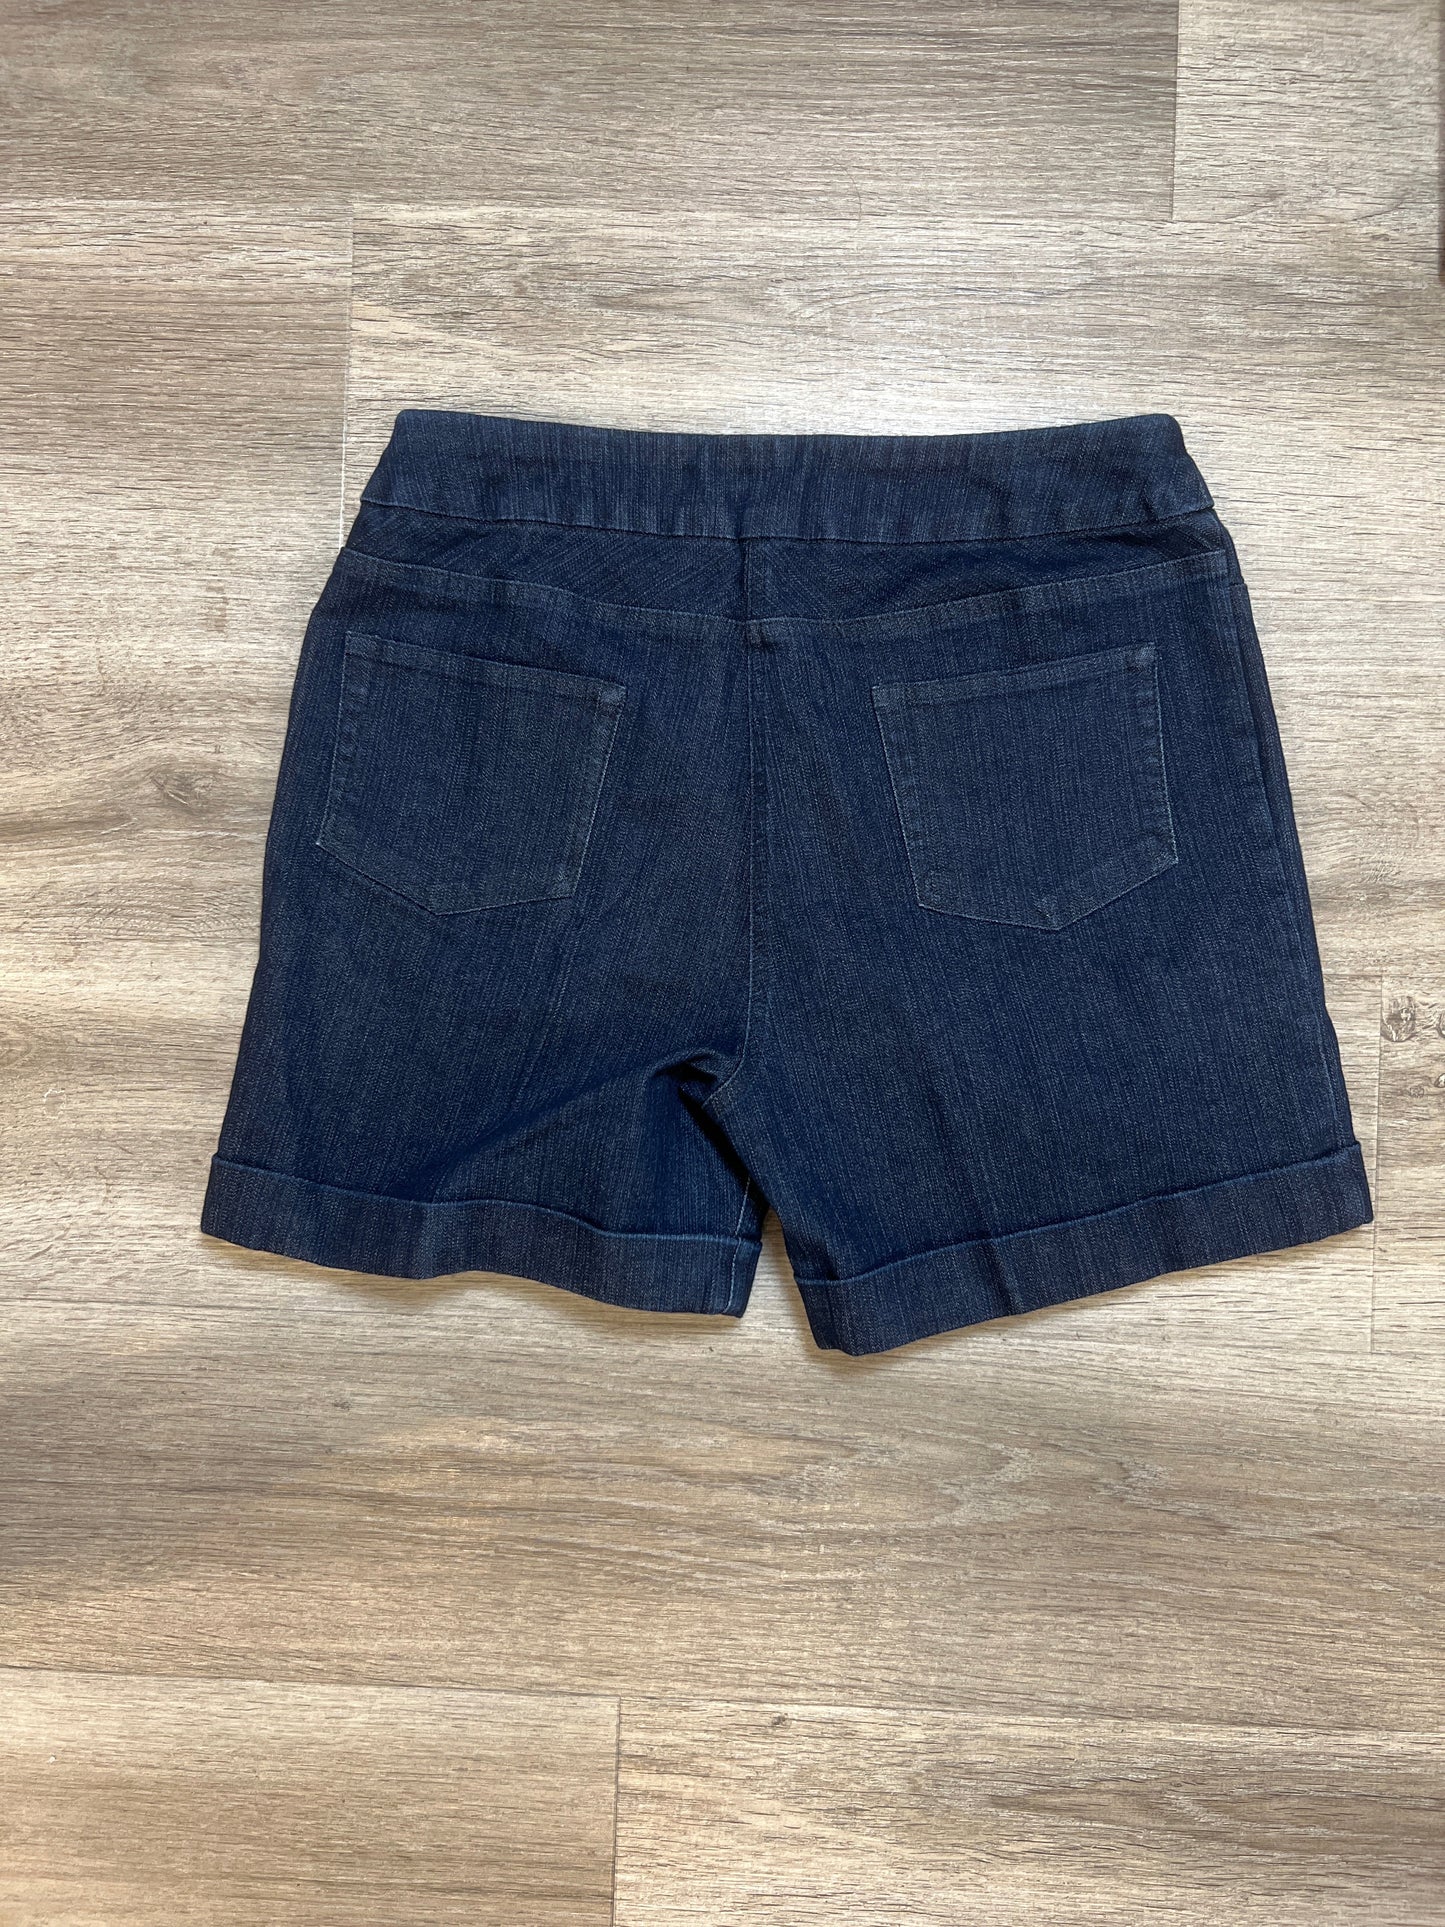 Shorts By Soft Surroundings  Size: S